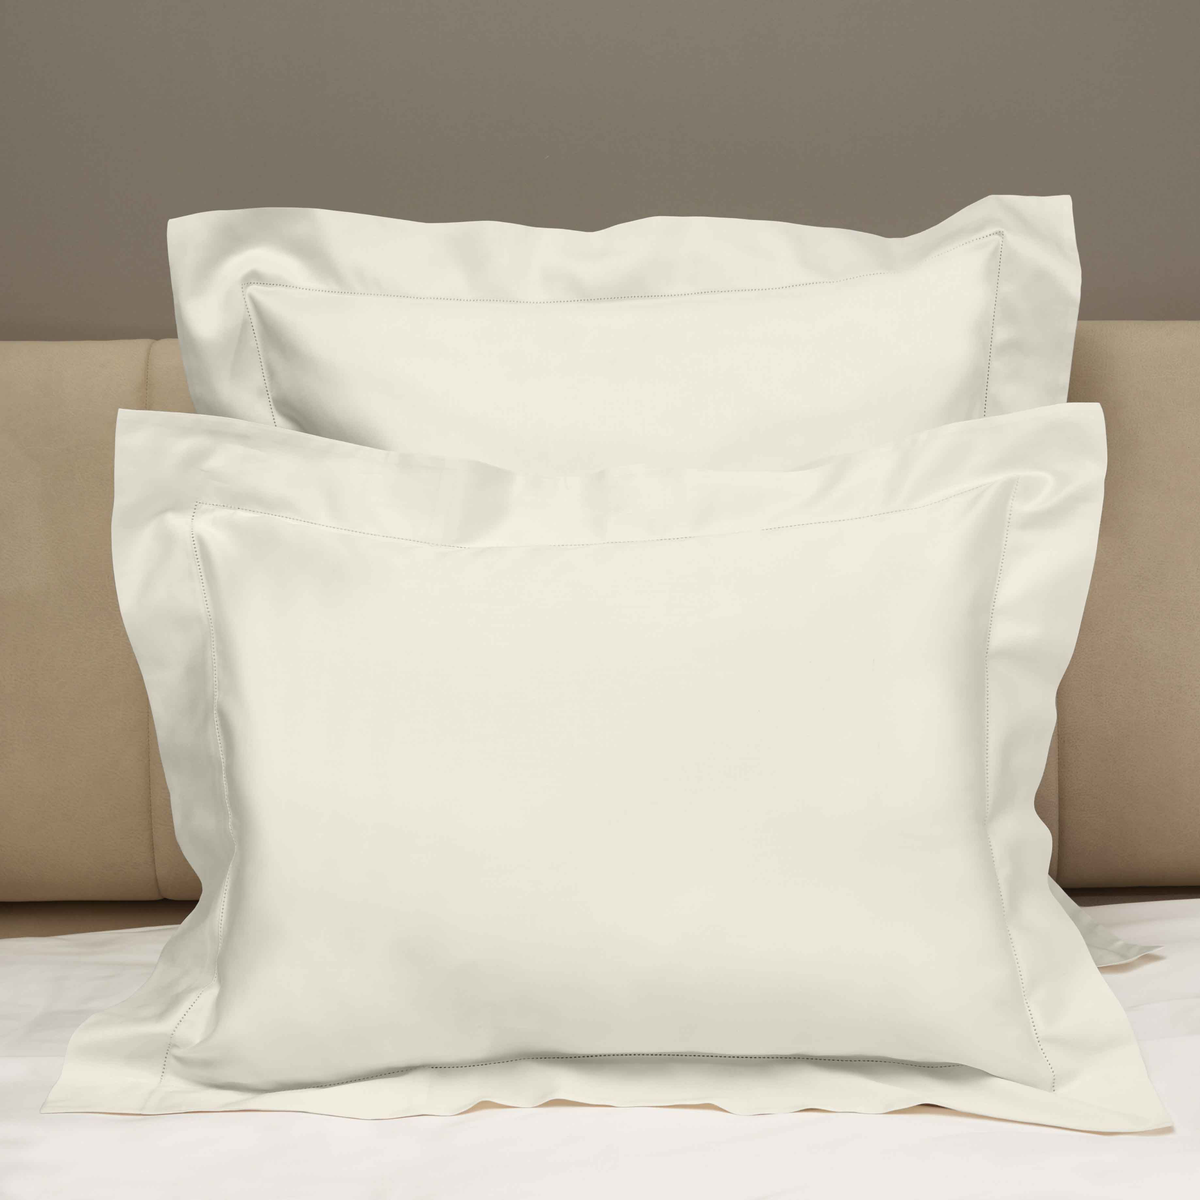 Front View of Signoria Nuvola Bedding Shams in Ivory Color